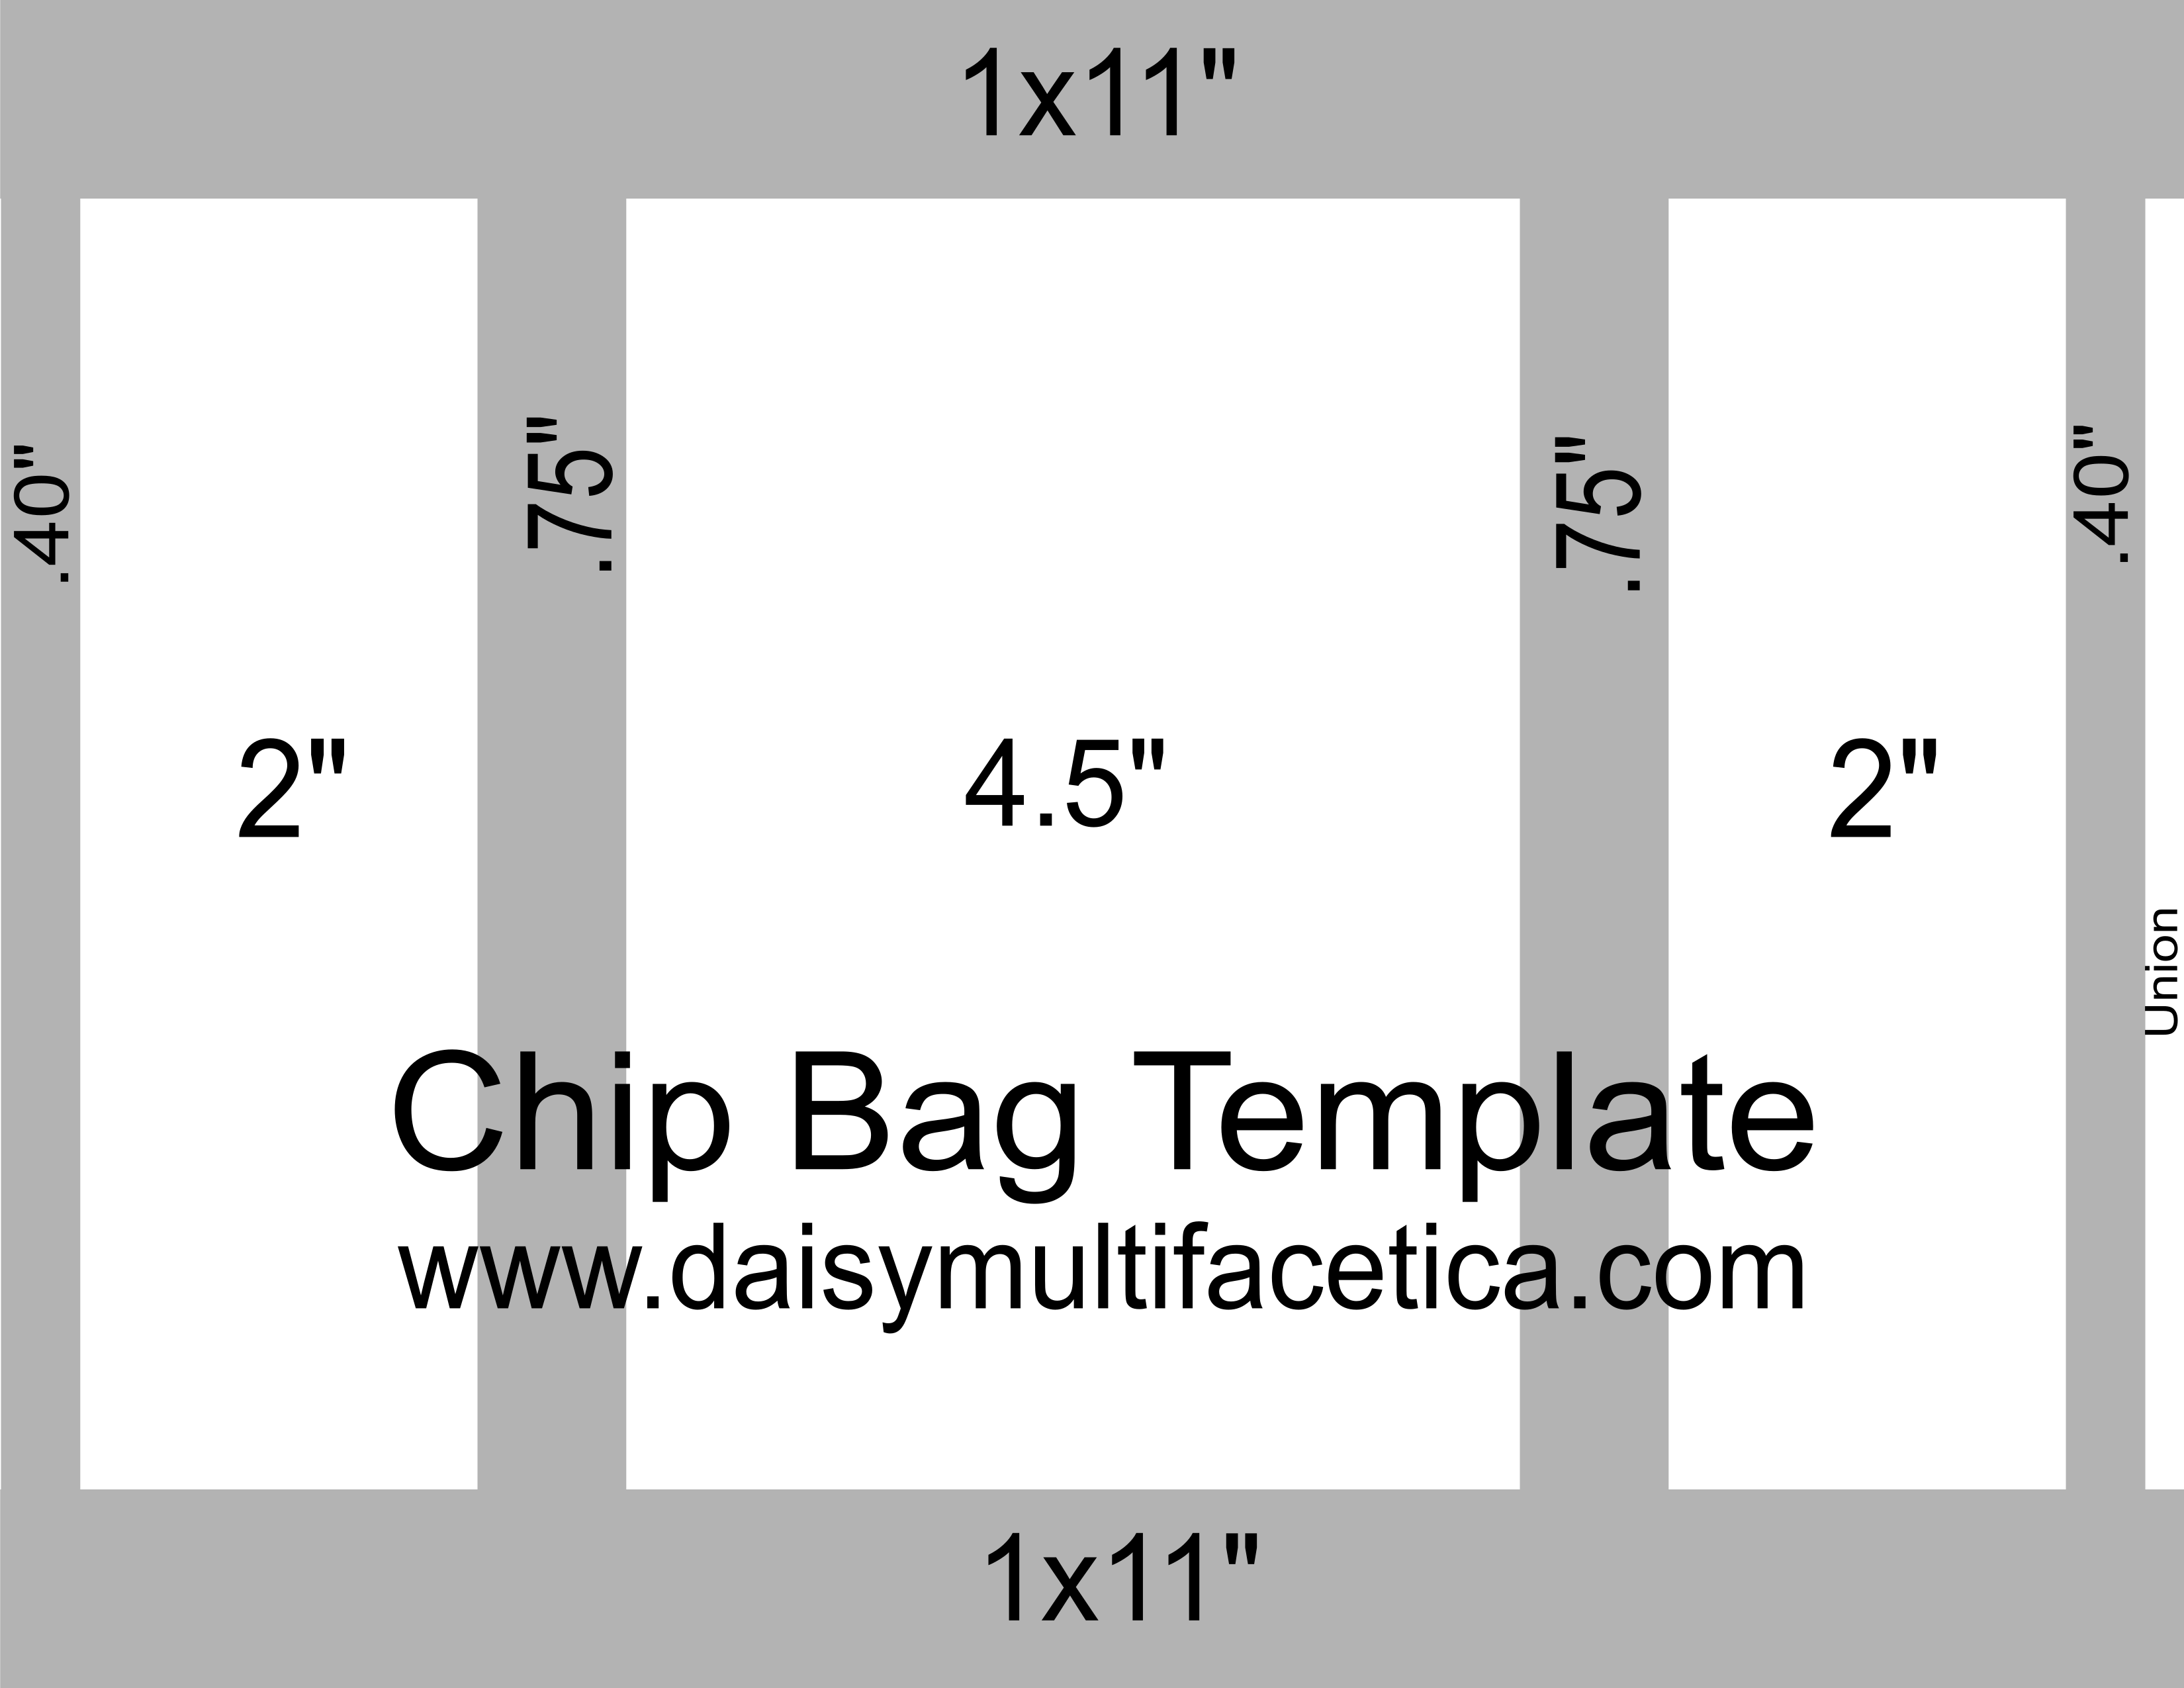 FREE Chip Bag Templates All Occasion Chip Bags Daisy Multifac tica